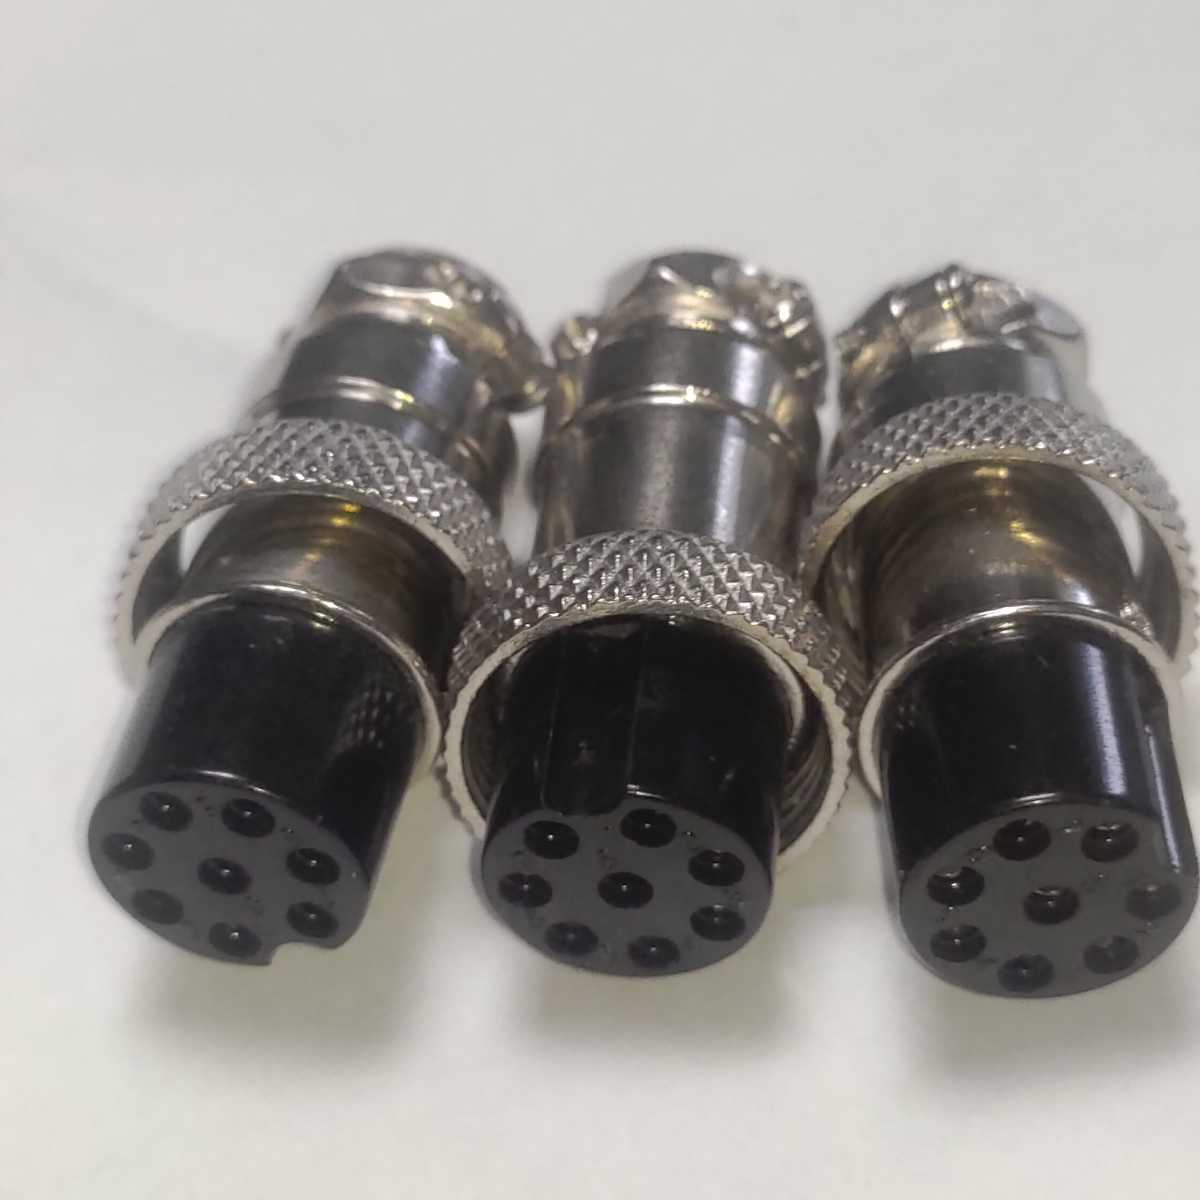 3 piece set 8 pin Mike connector transceiver .